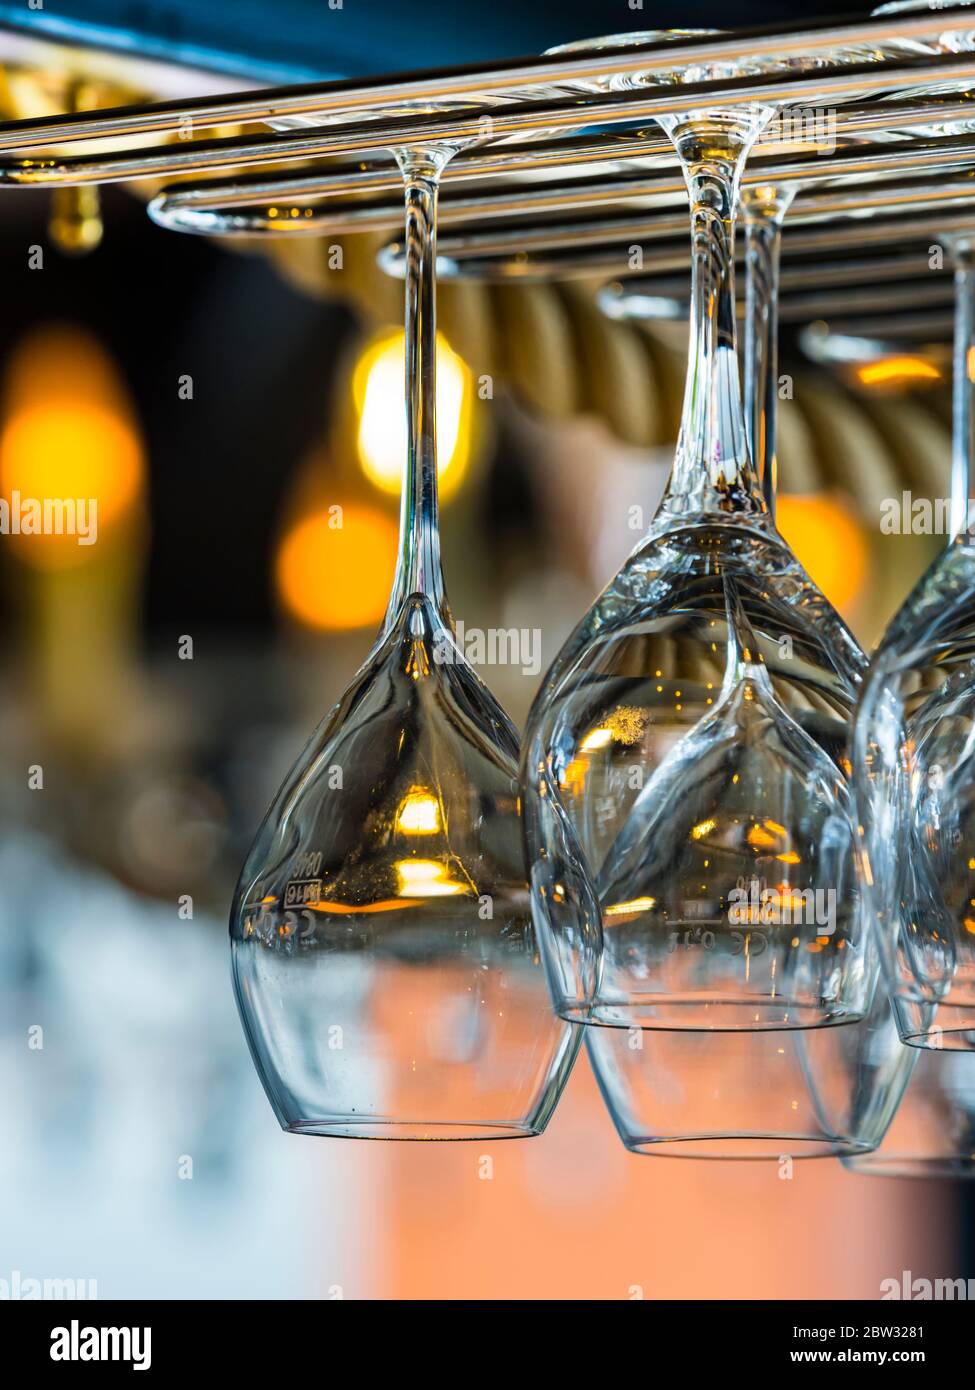 Many multiple bunch of drinking glasses empty ready clean washed cleaned hanging from above inverted in bar isolated Stock Photo